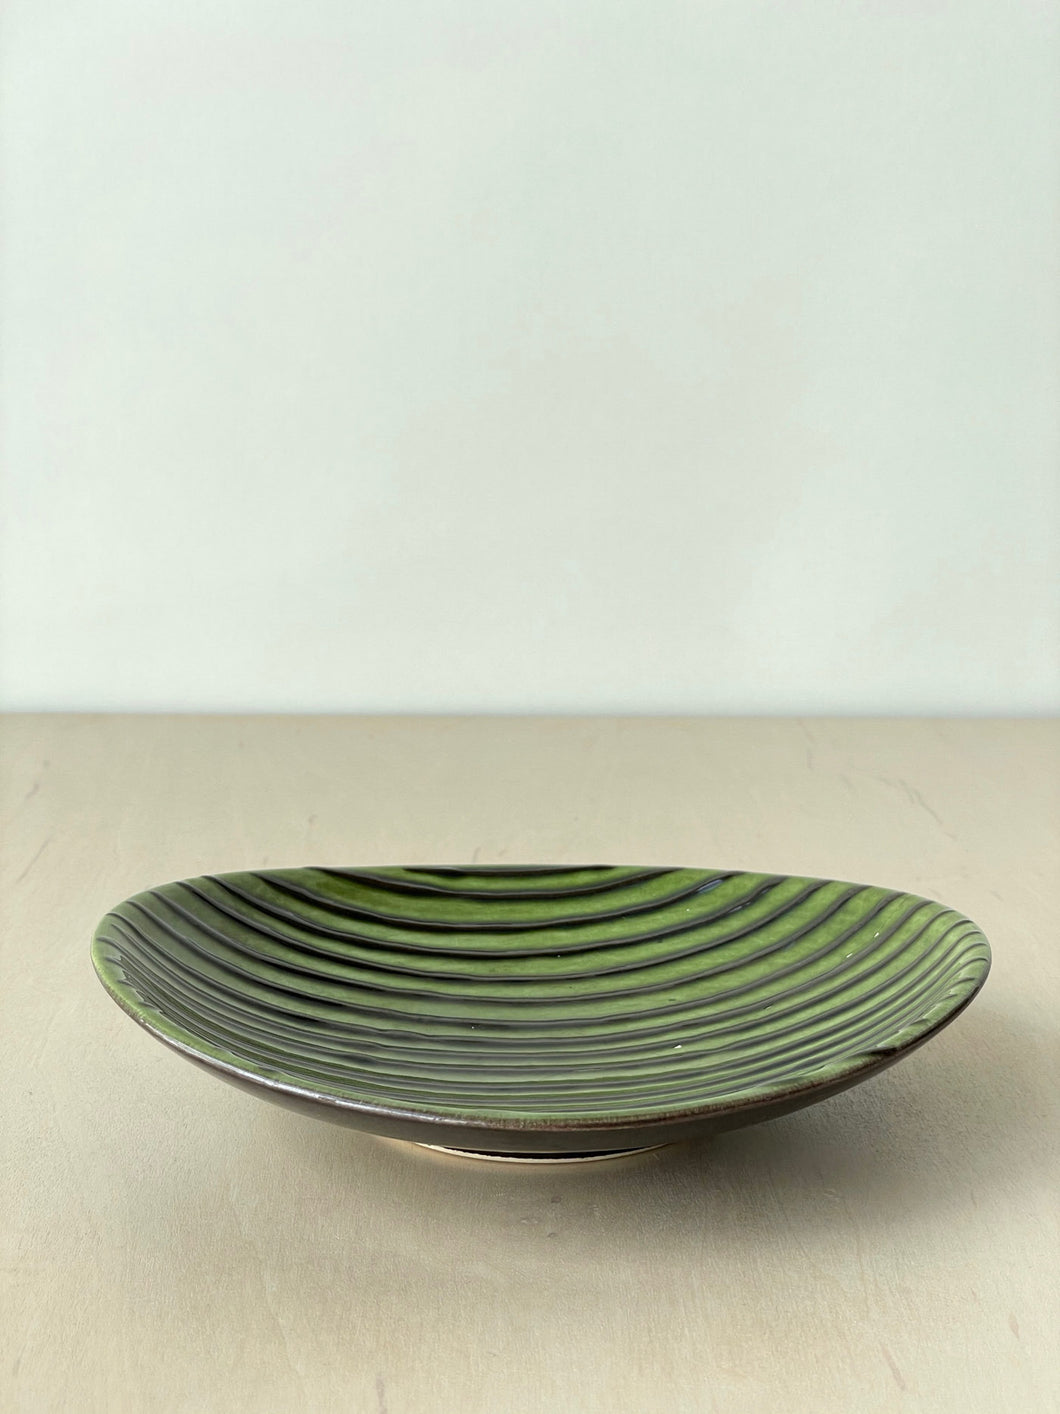 Vintage Green and Black Striped Shallow Dish